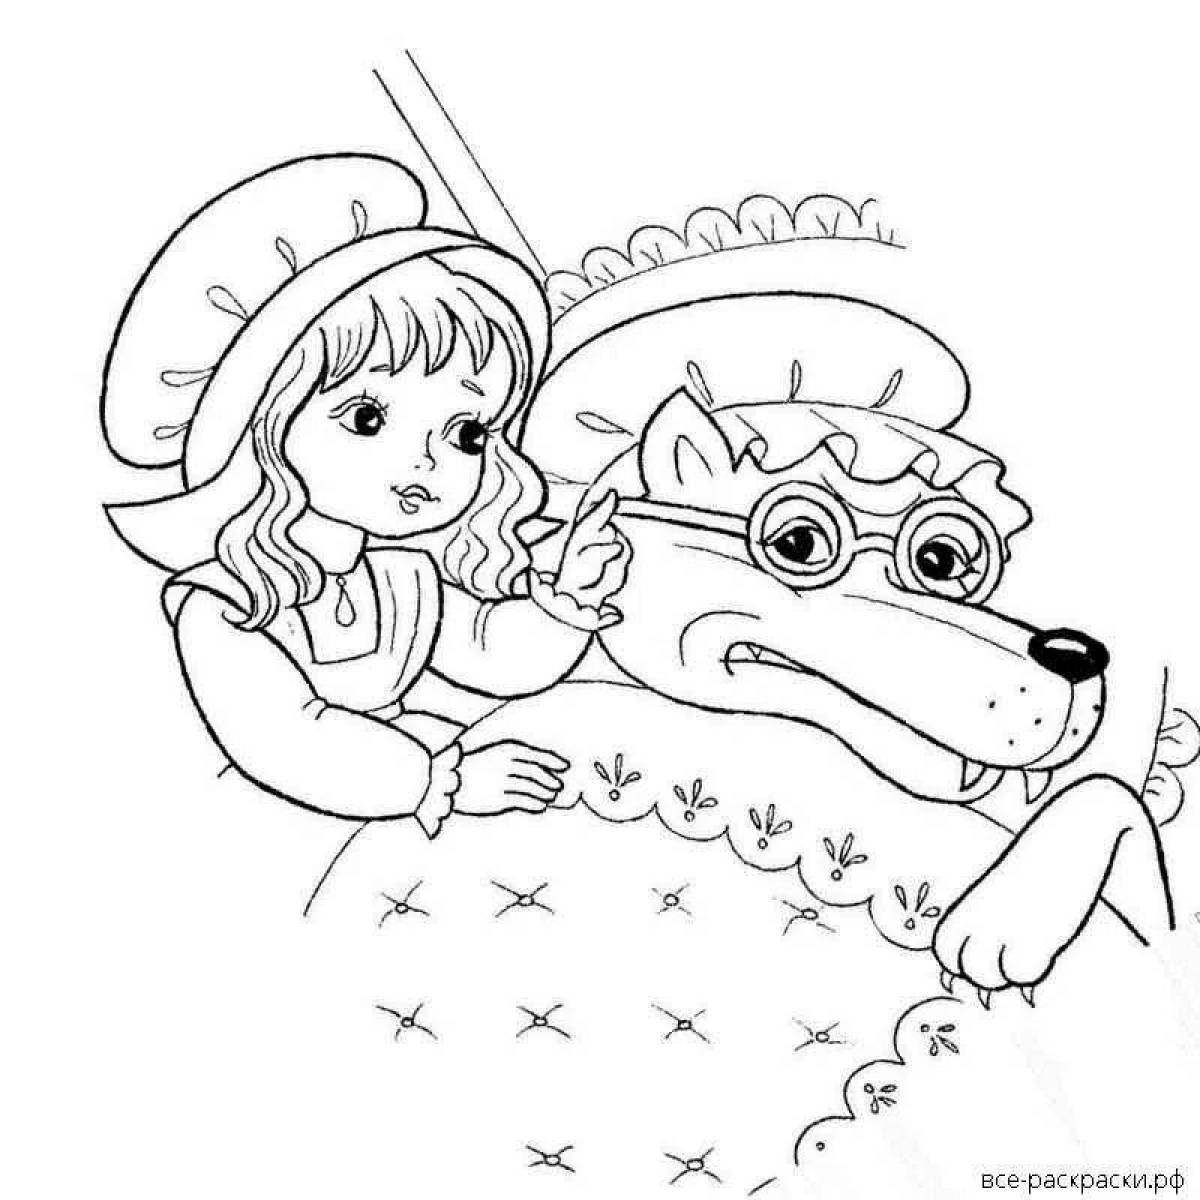 Wonderful coloring wolf and little red riding hood